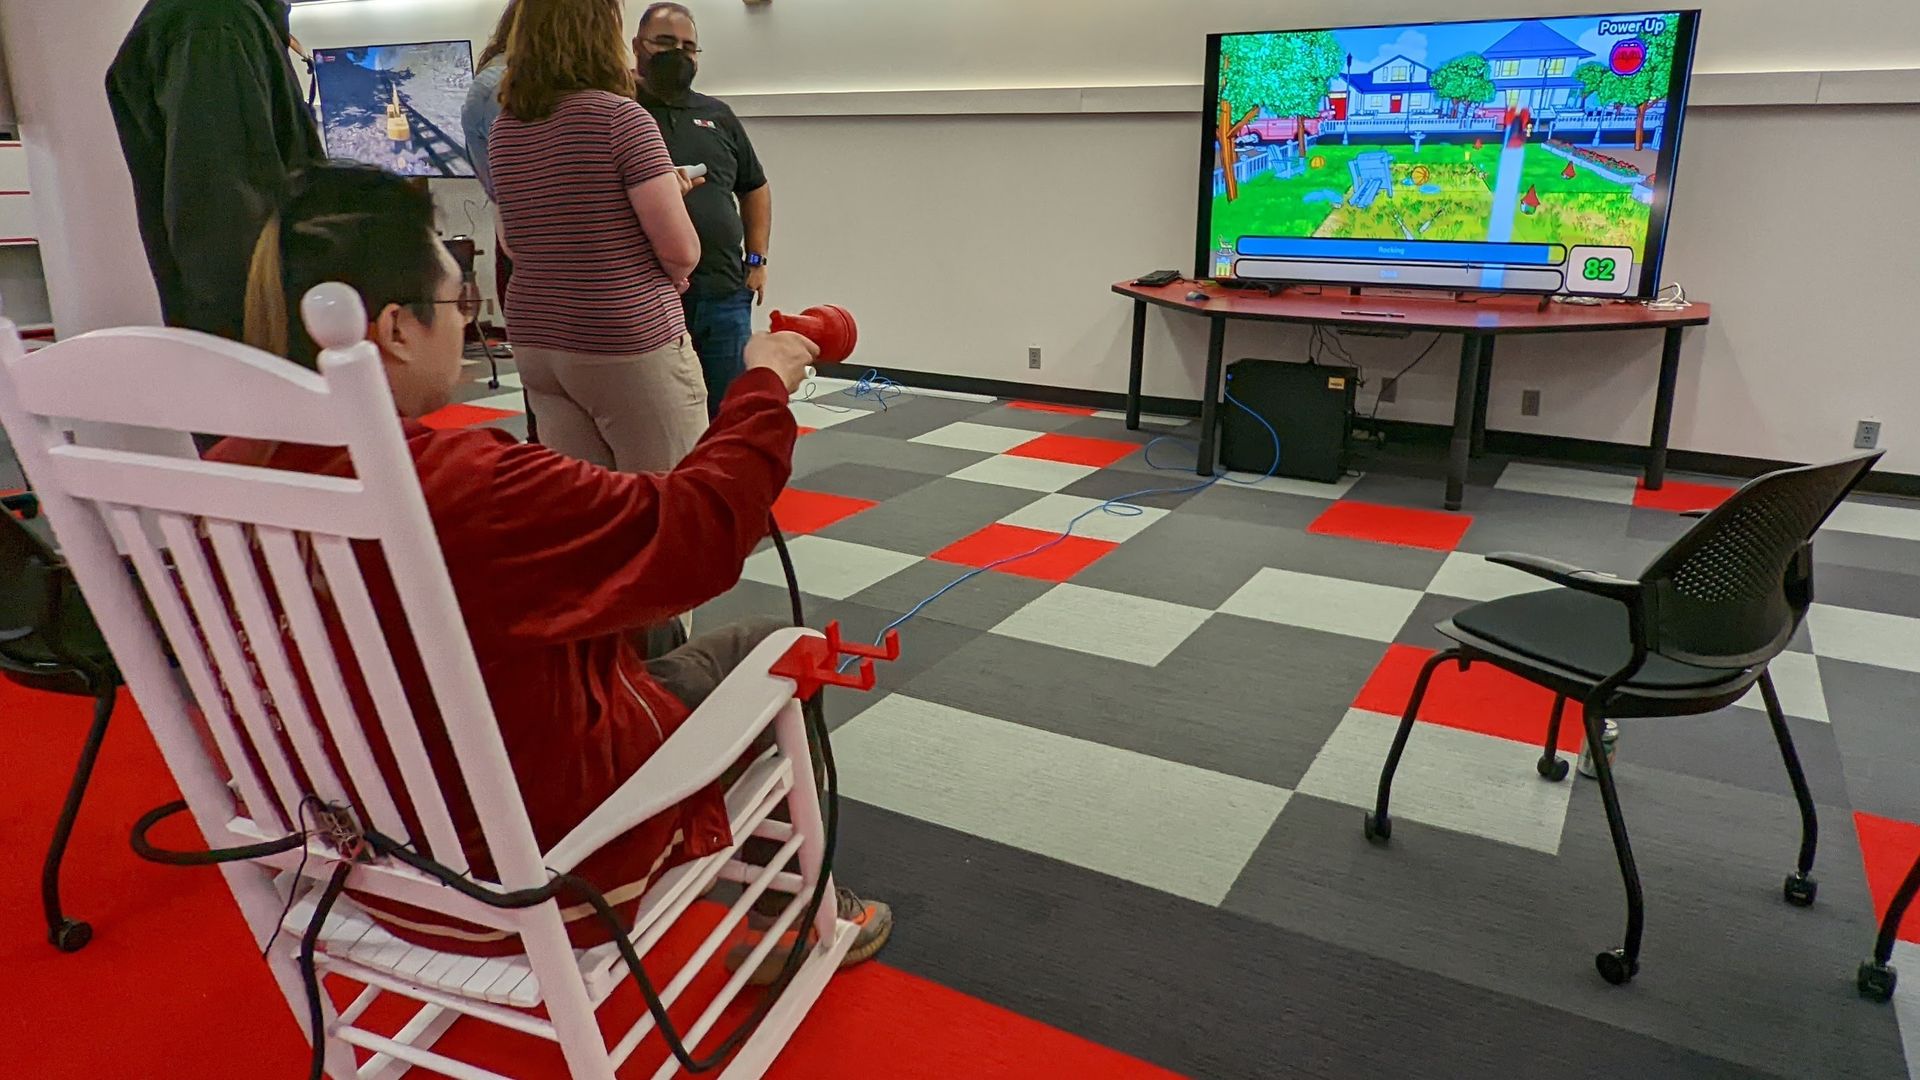 A man plays a video game in a white rocking chair, with a game controller shaped like a hose nozzle. 